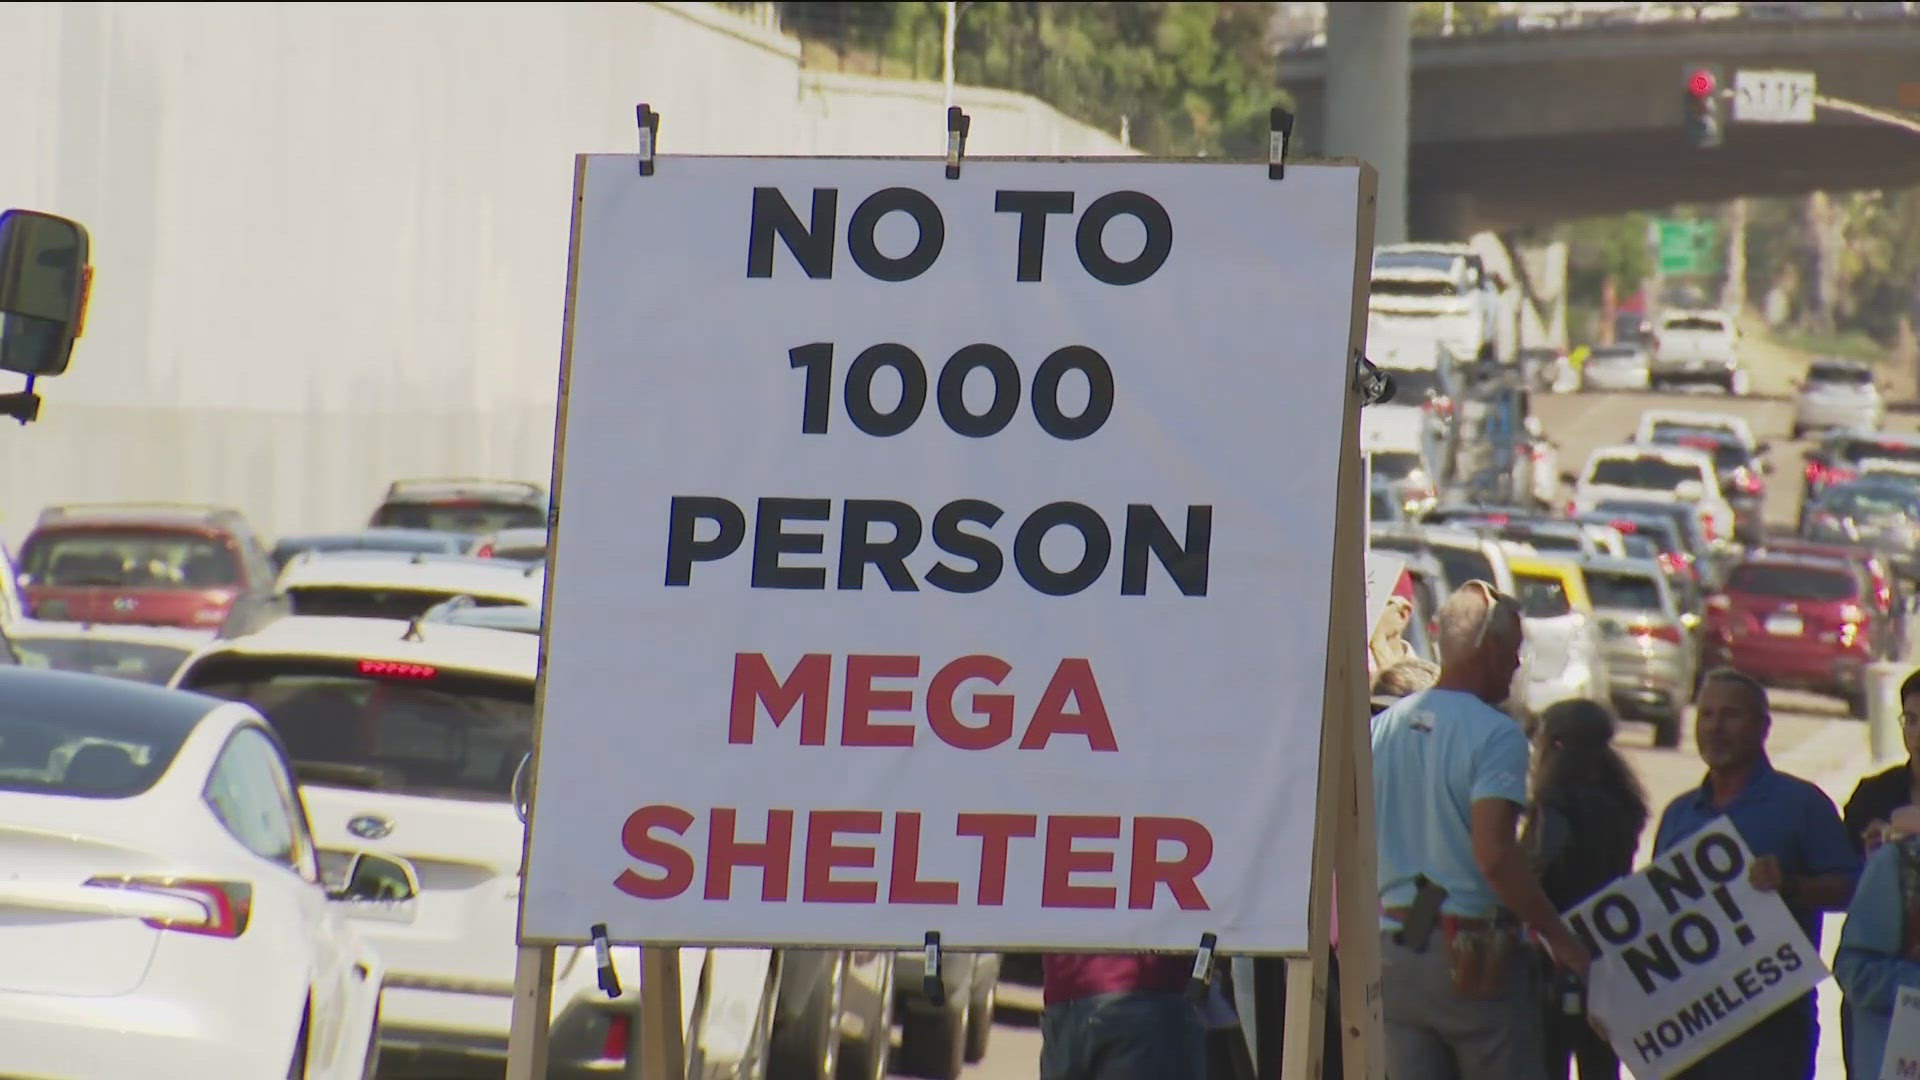 A group of San Diego residents rallied near the proposed homeless shelter site in Middletown Friday afternoon.